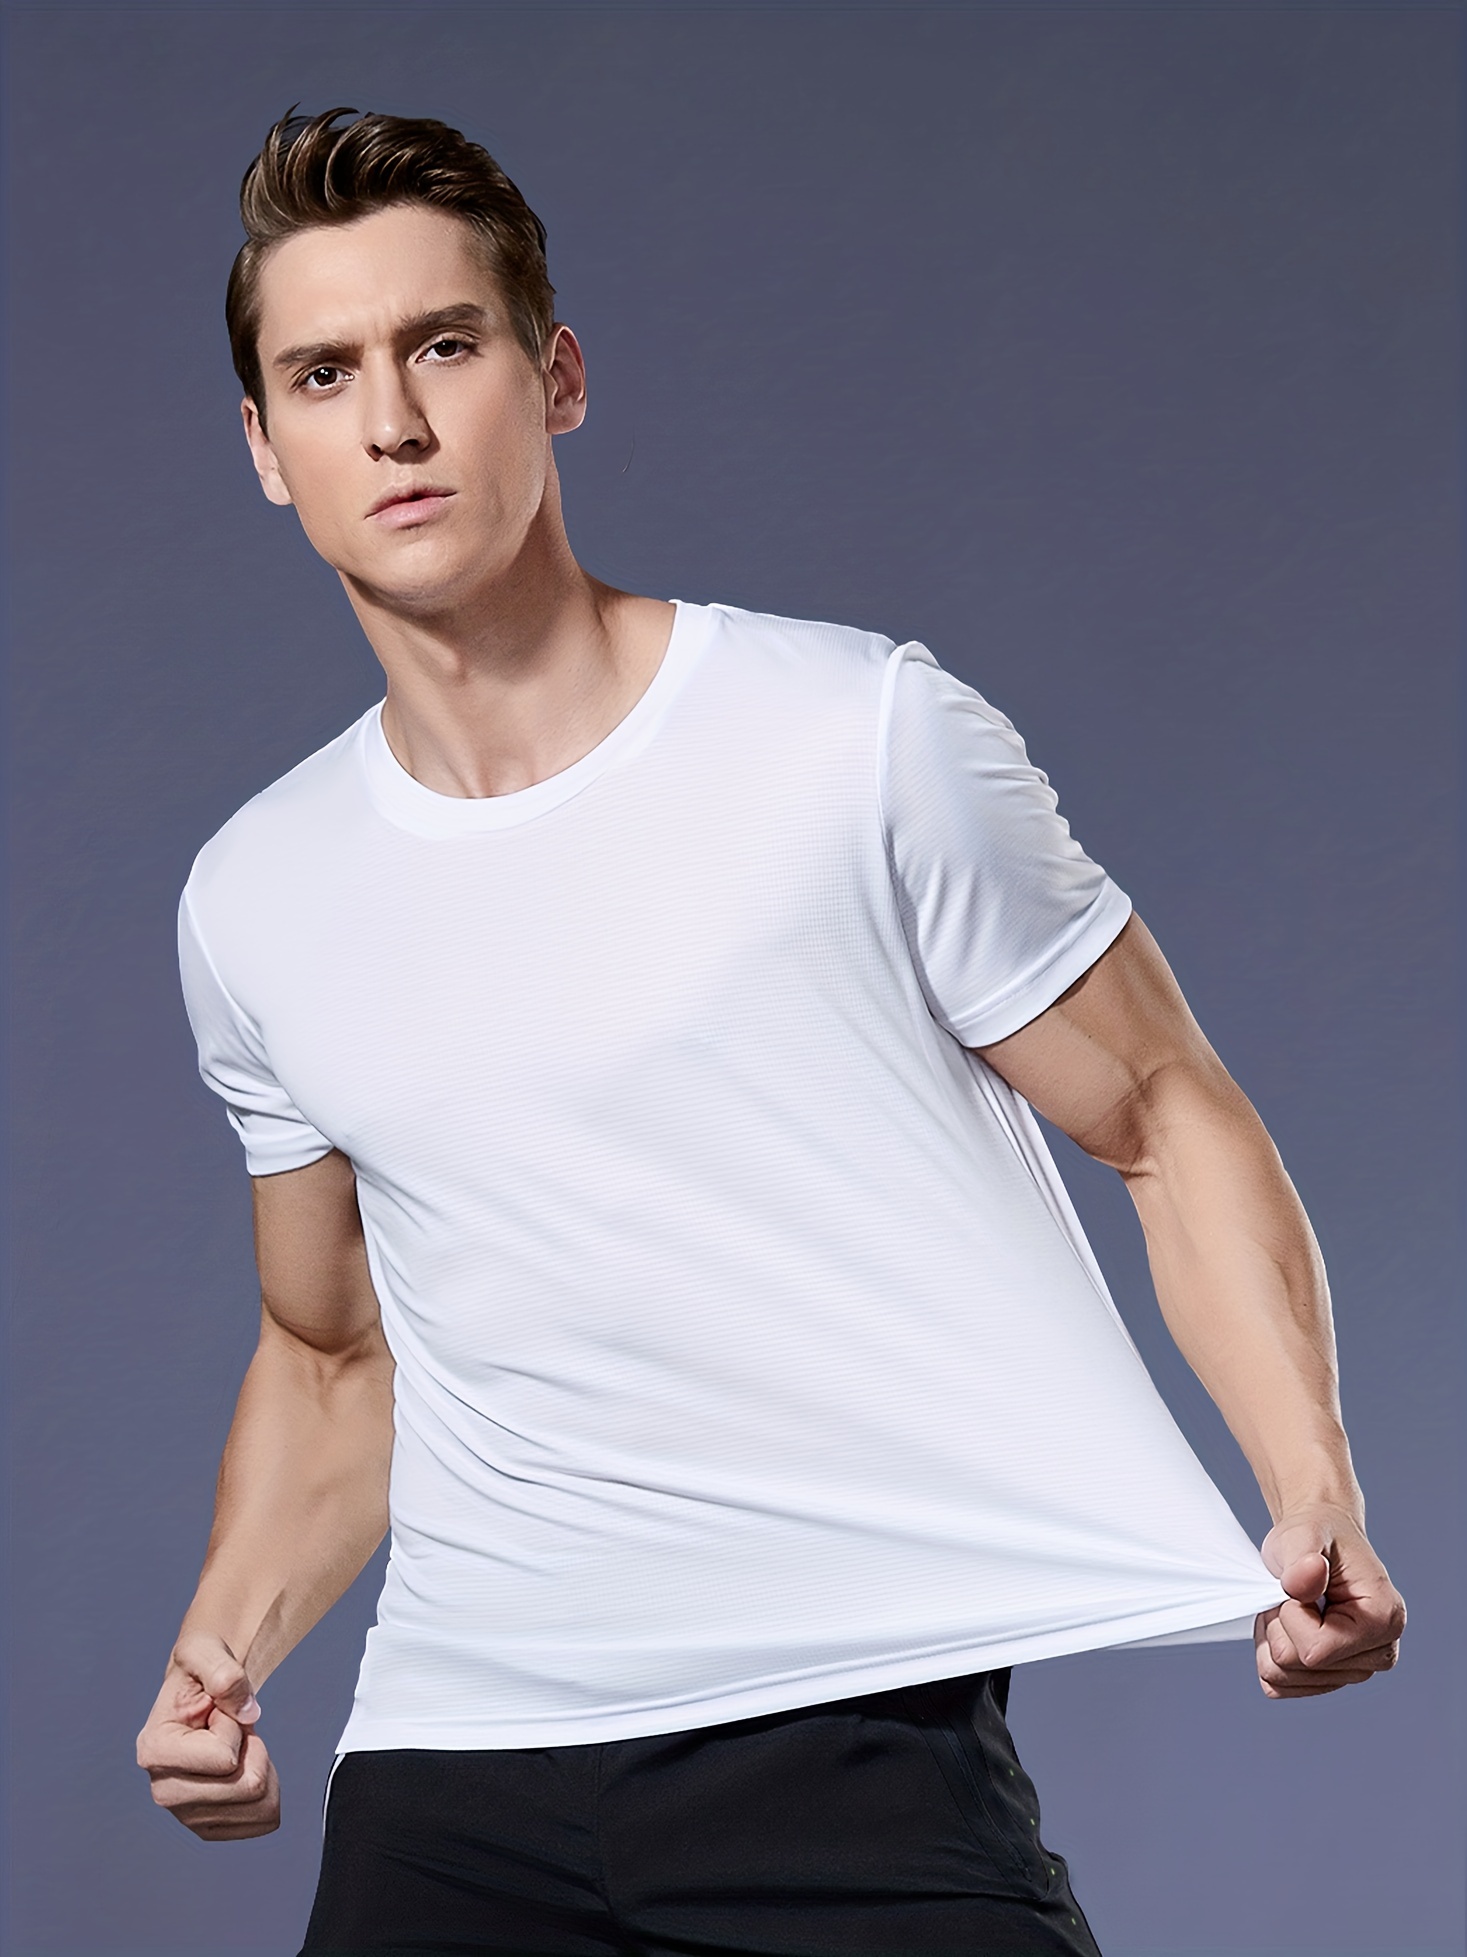 Herrnalise Men's Mesh Quick-Dry Short Sleeve Workout Shirt Men Fitness  Sports O-neck Stretch Quick-drying Top Short-sleeved Tight T-shirt 